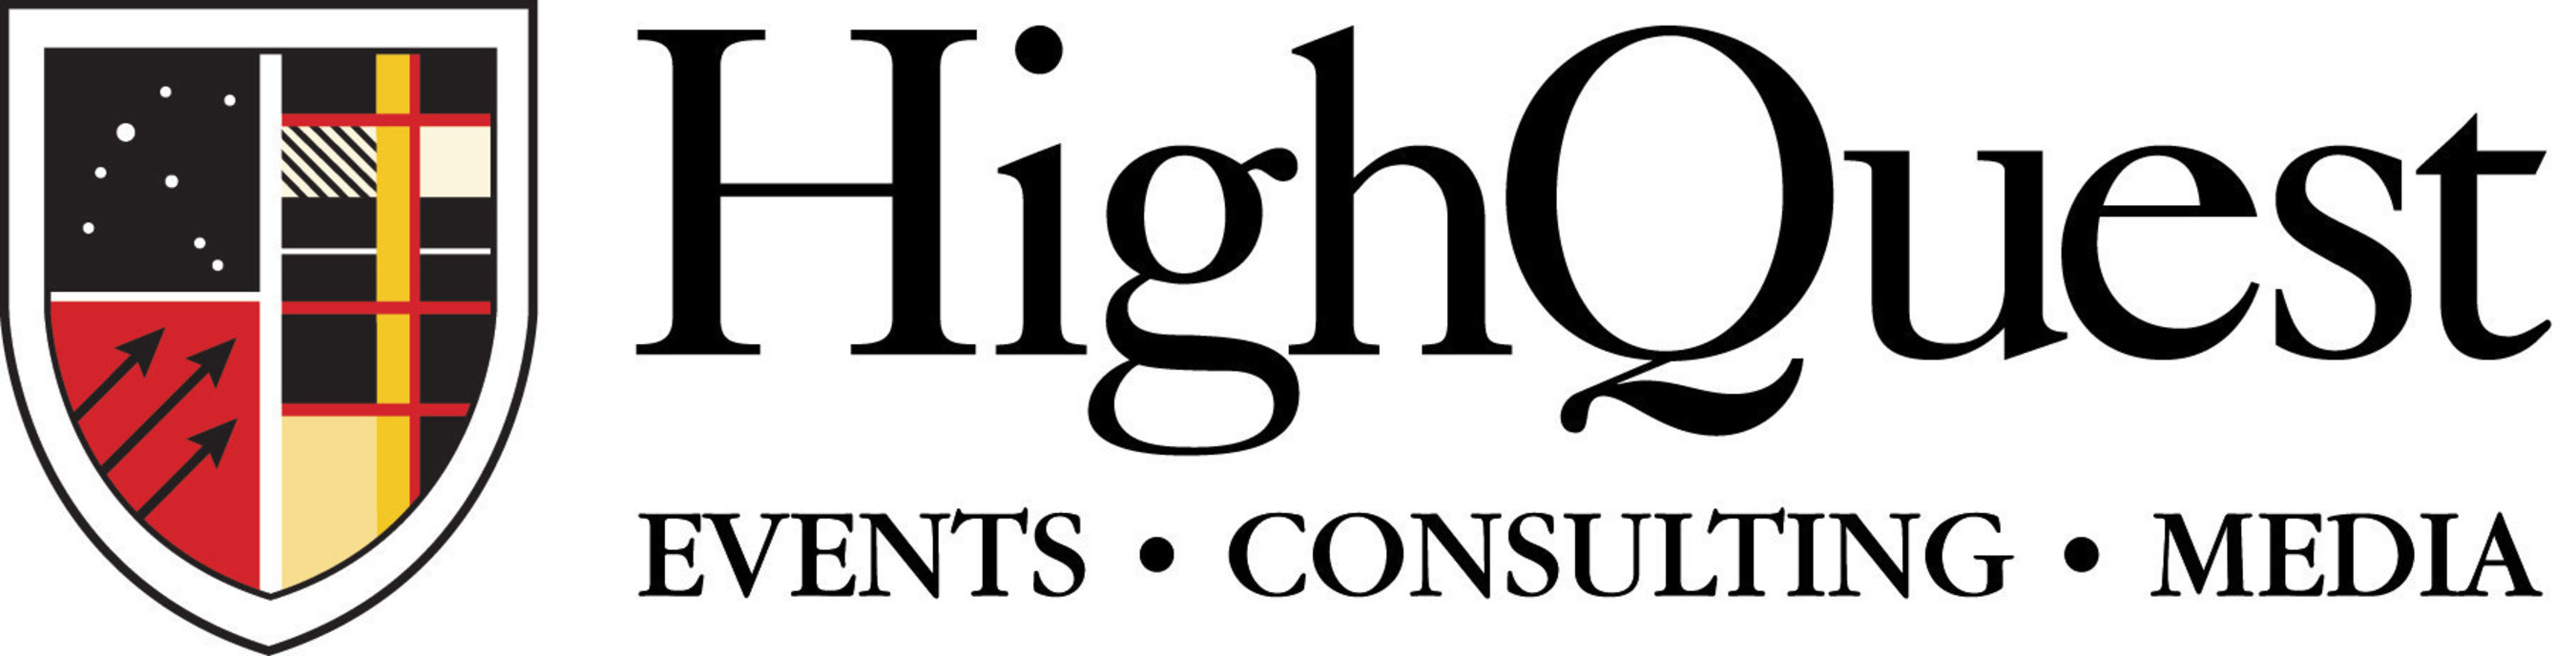 HighQuest Group will bring the co-located Oilseed & Grain Trade Summit and Organic & Non-GMO Forum to Minneapolis this fall.